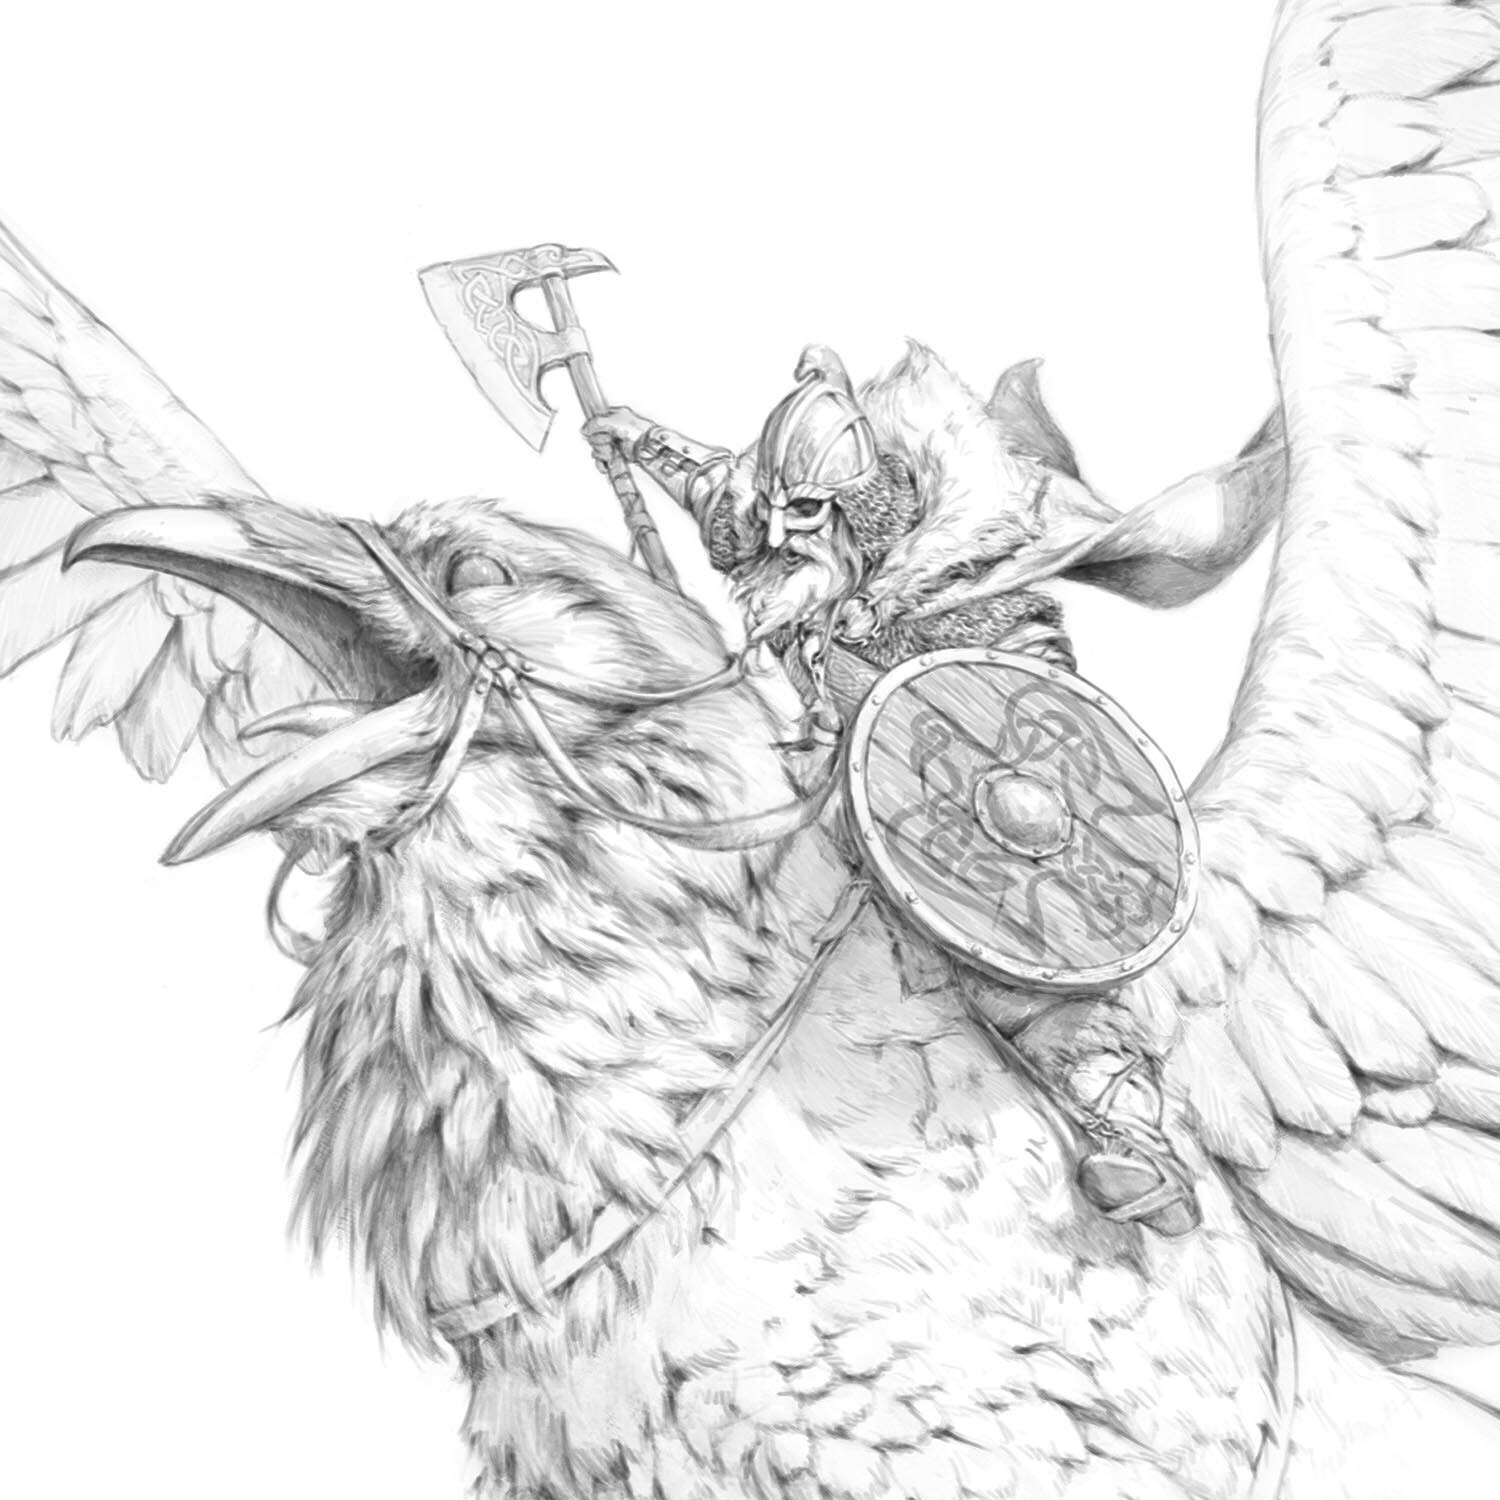 Norse King on Hippogriff by Carlos Amaral